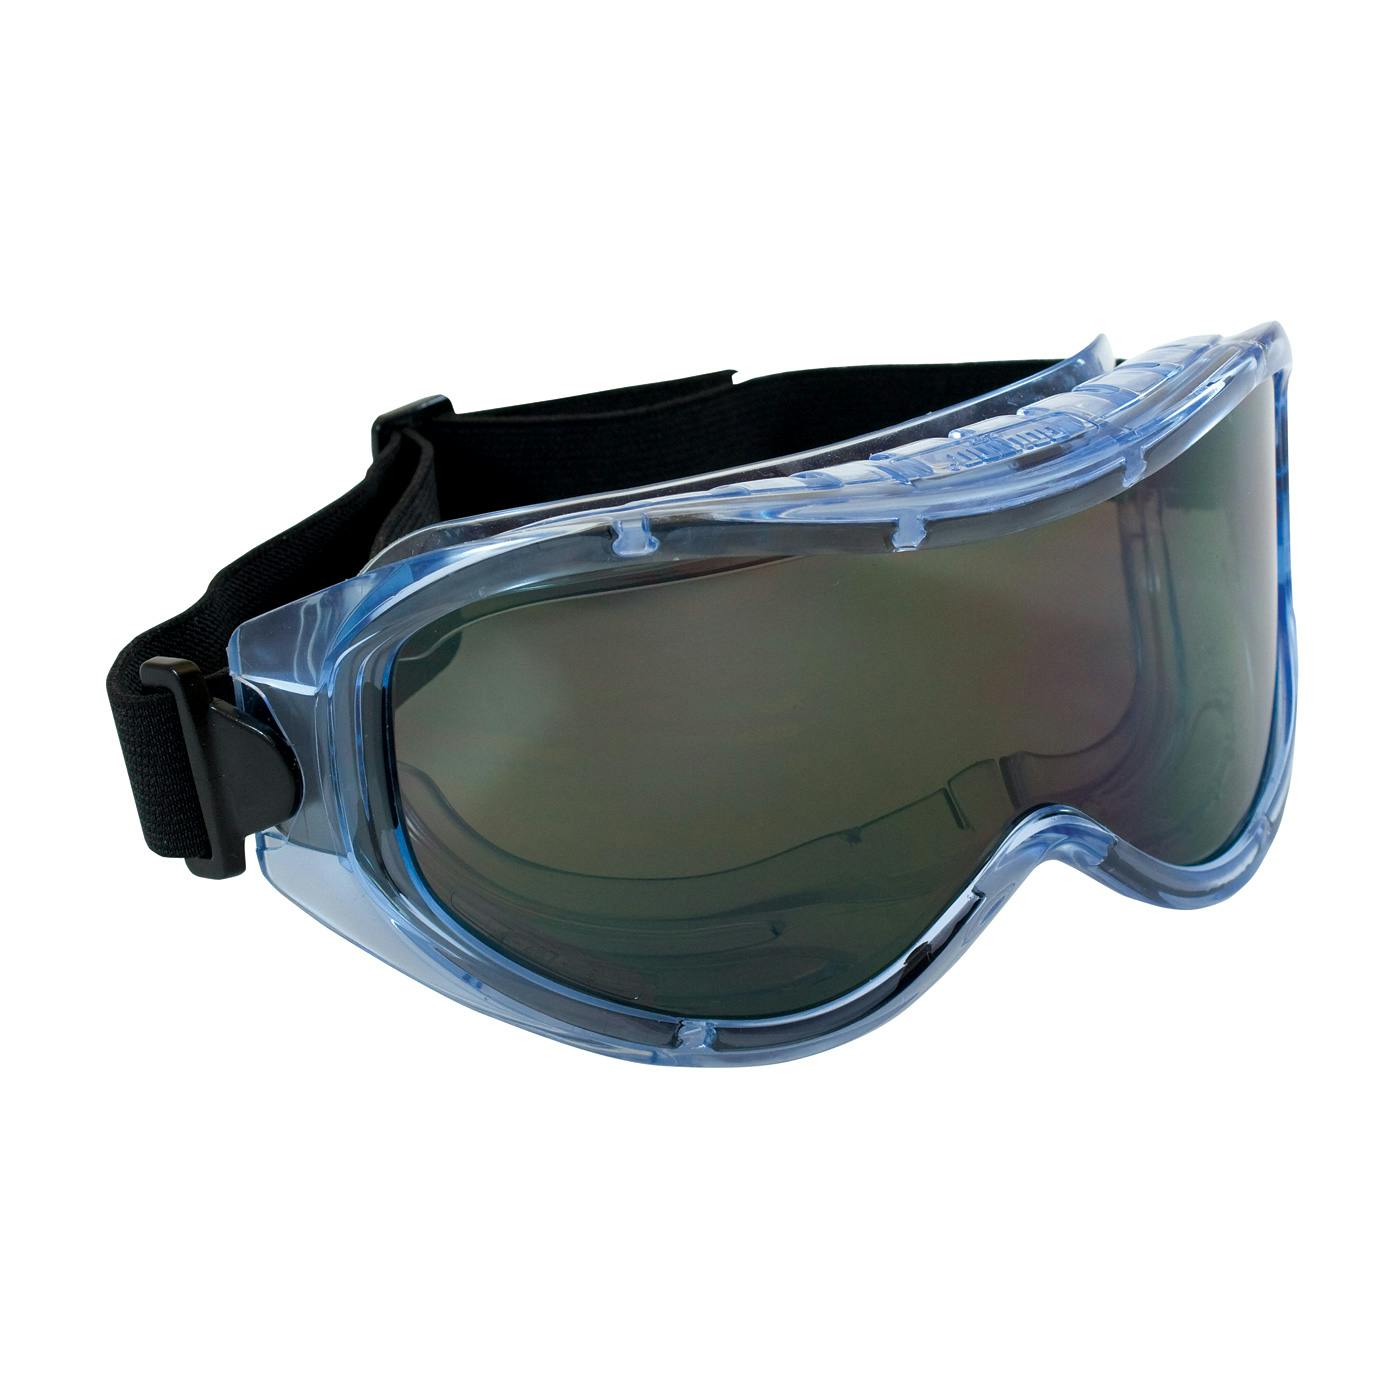 Indirect Vent Goggle with Light Blue Body, Grey Lens and Anti-Scratch / Anti-Fog Coating, Light Blue (251-5300-402) - OS_1